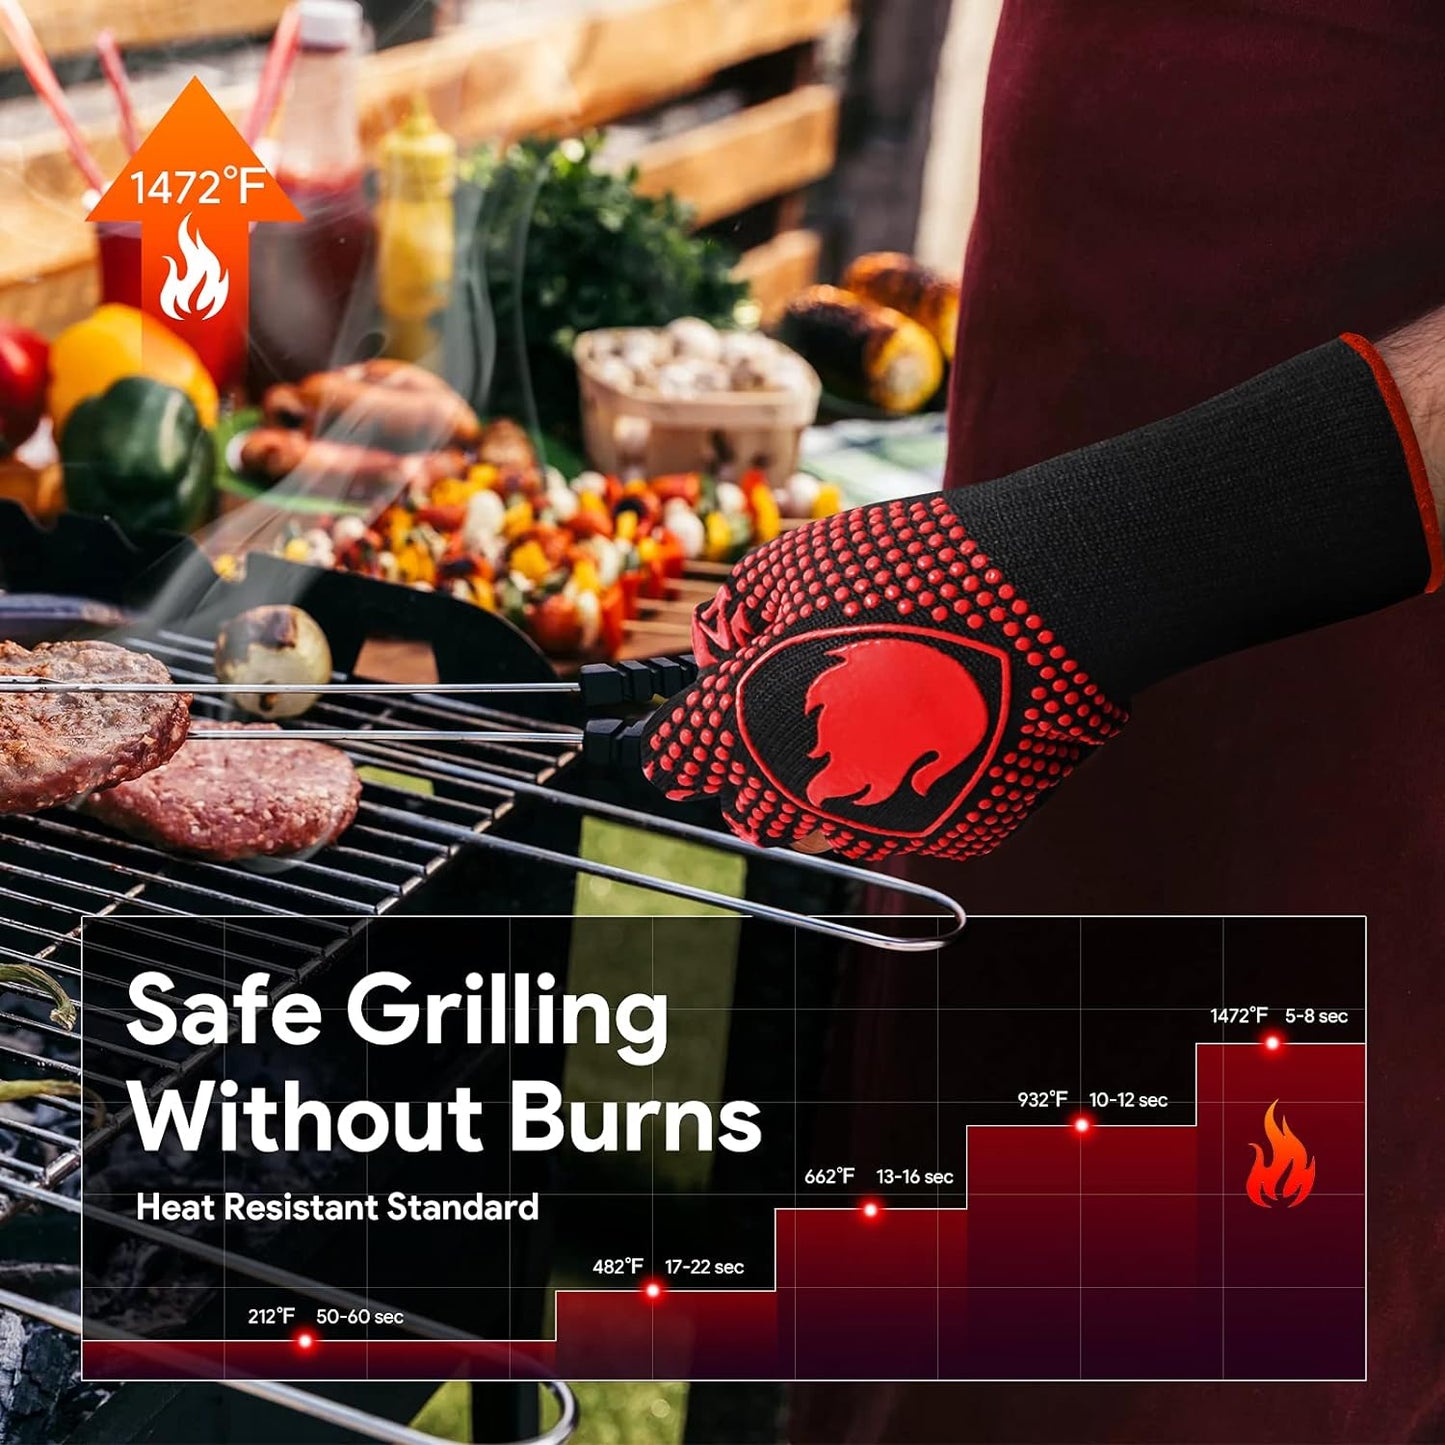 BBQ Gloves, Heat Resistant Oven Mitts Grilling Gloves - 1472℉ Extreme Heat Resistant, Oven Gloves Silicone